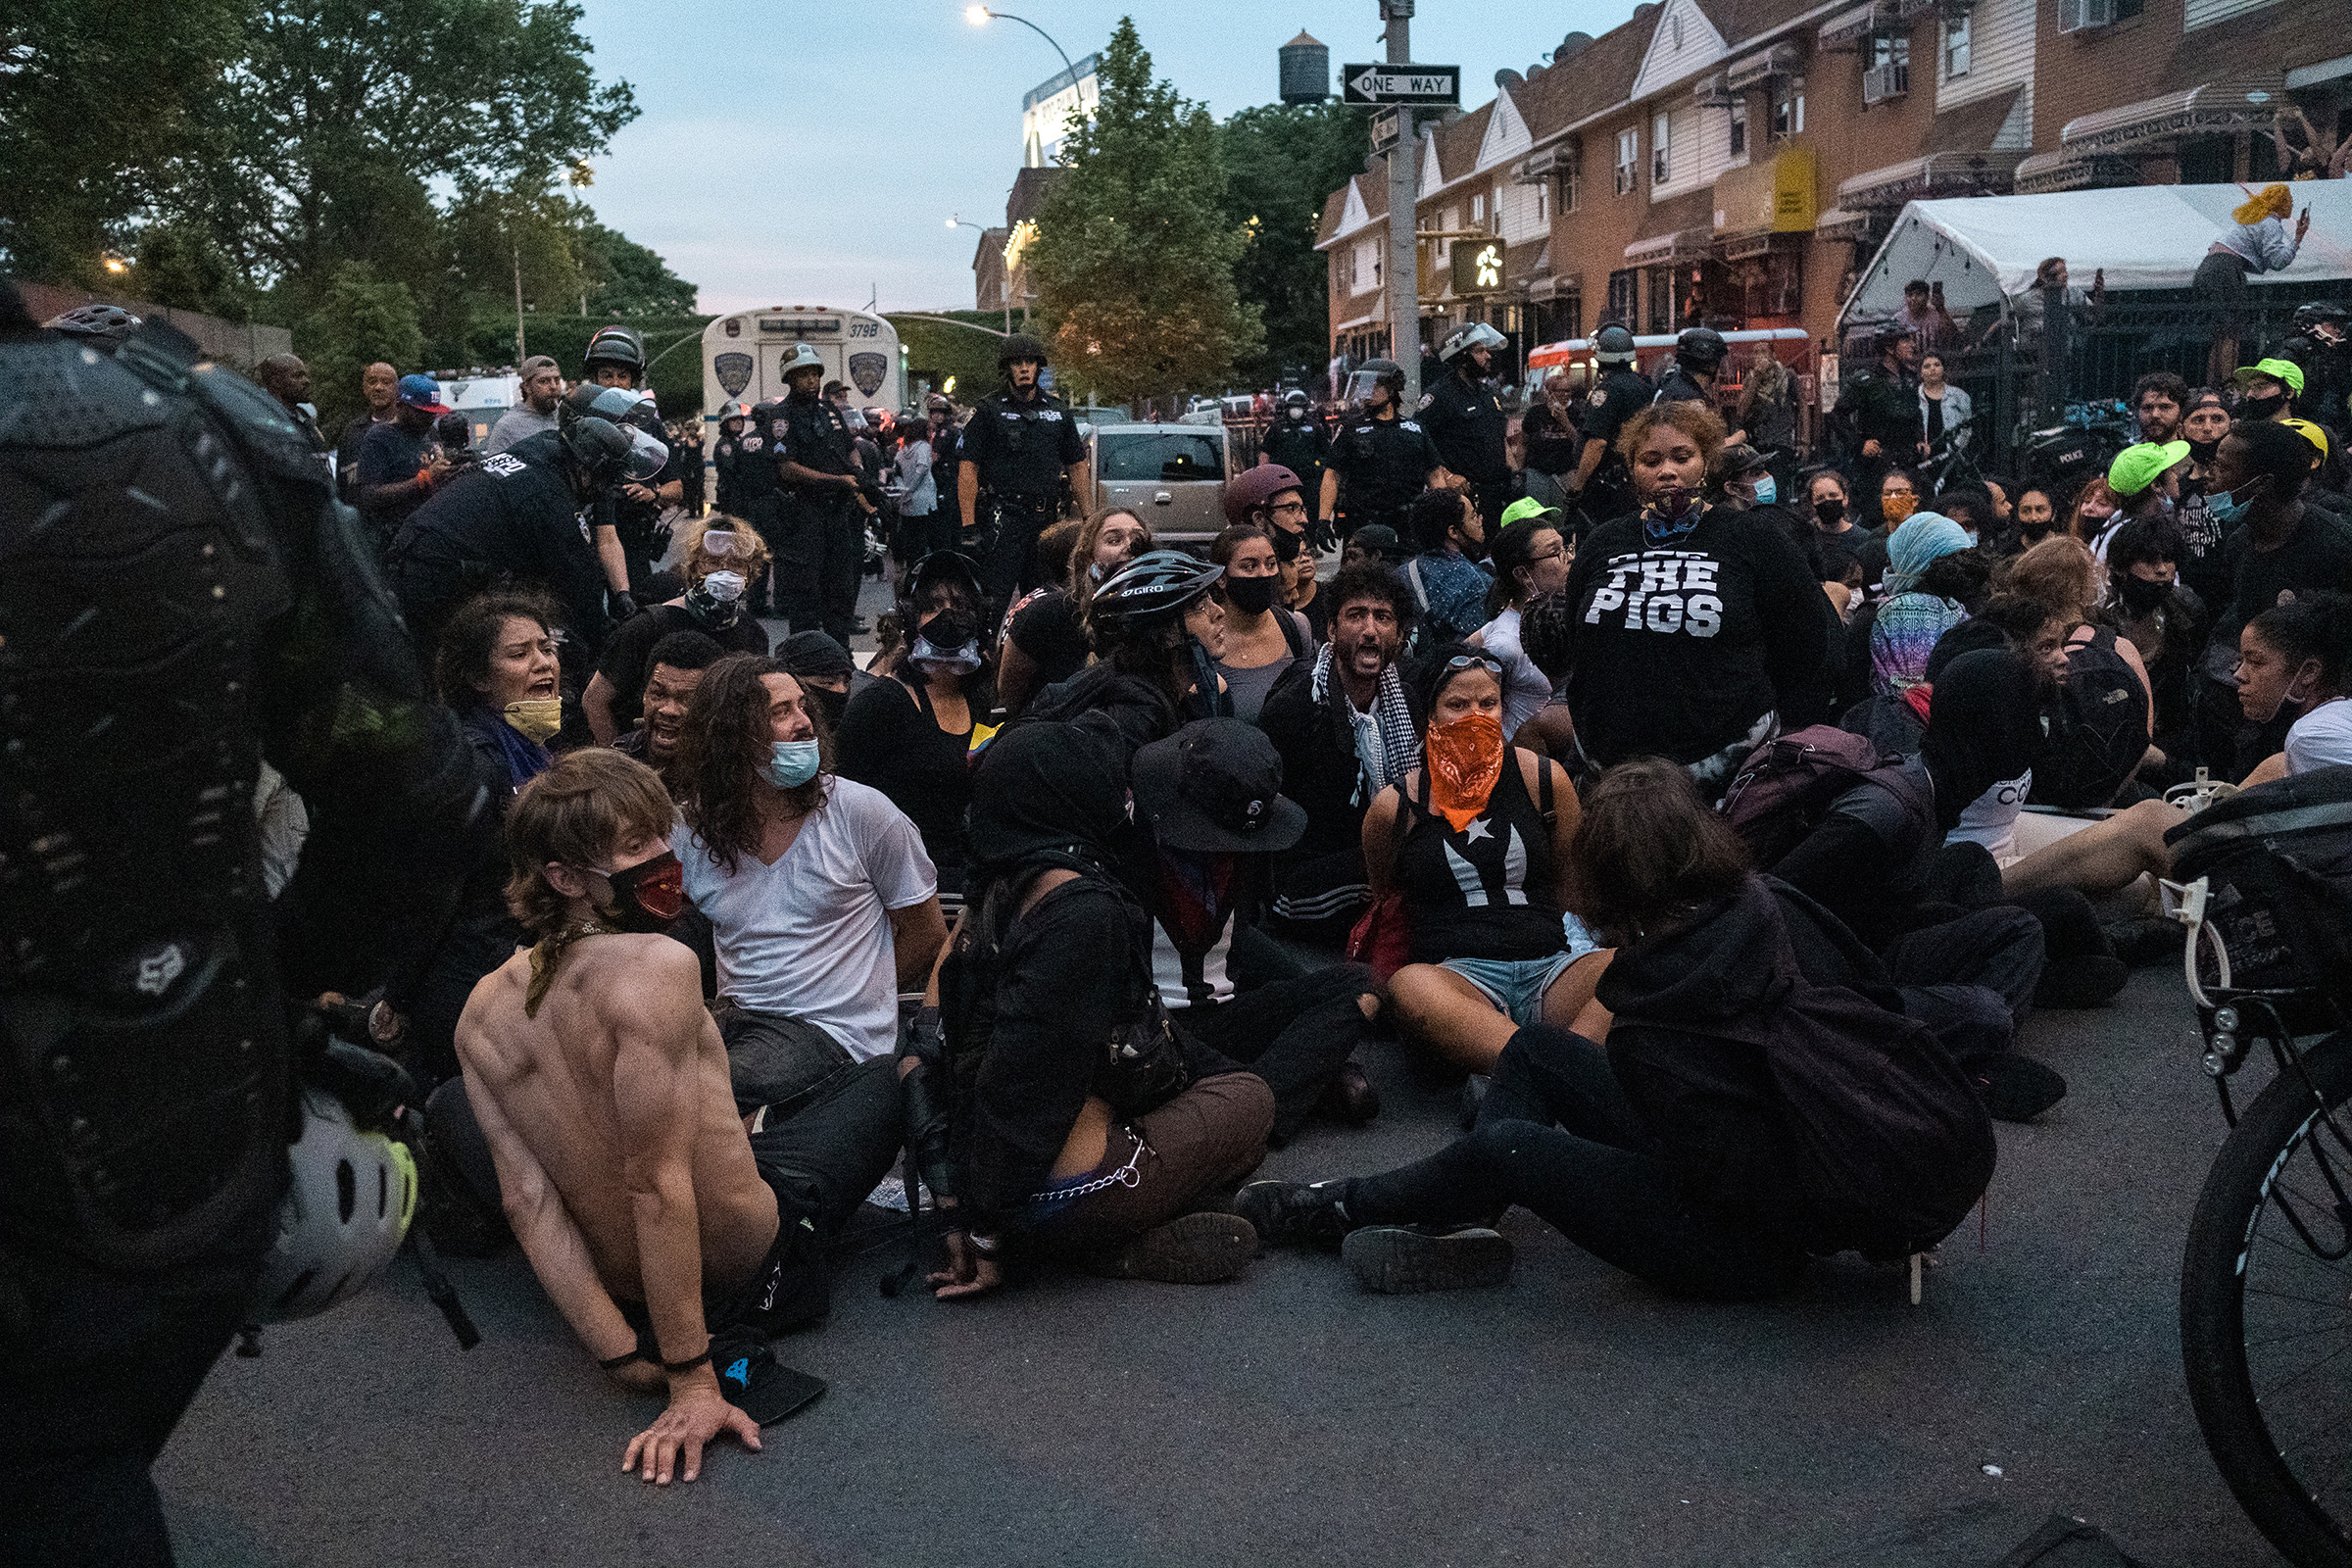 Demonstrators after being detained by police officers during a protest against the death of George Floyd in Mott Haven, the Bronx, on June 4